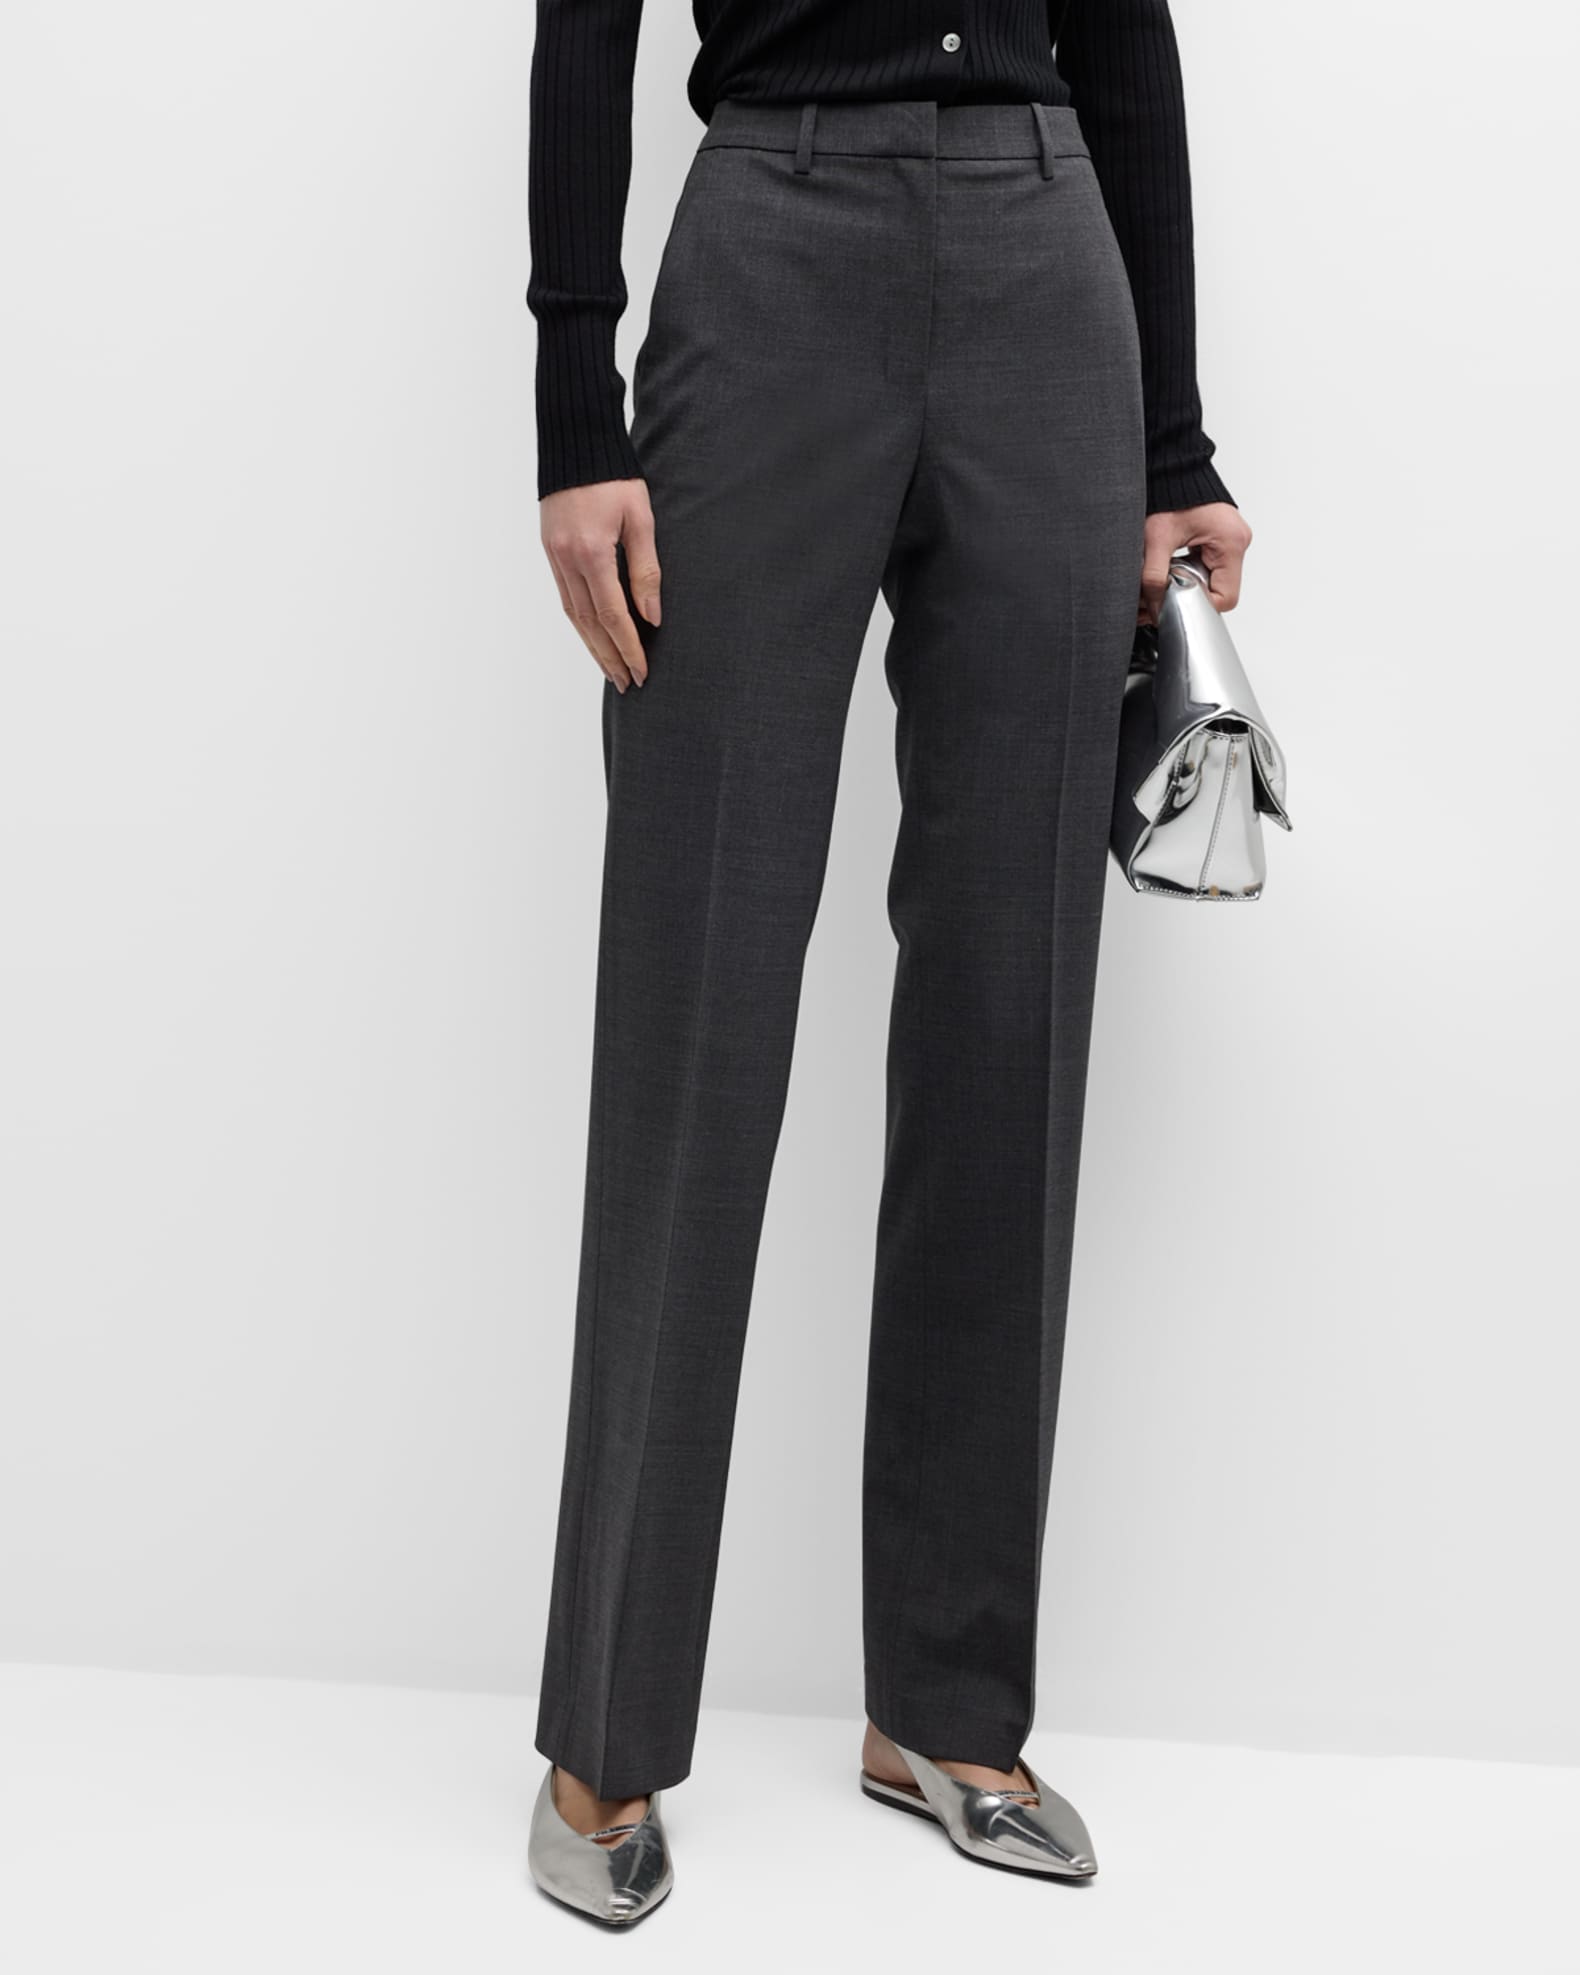 Theory Slim Full-Length Stretch Wool Trousers | Neiman Marcus